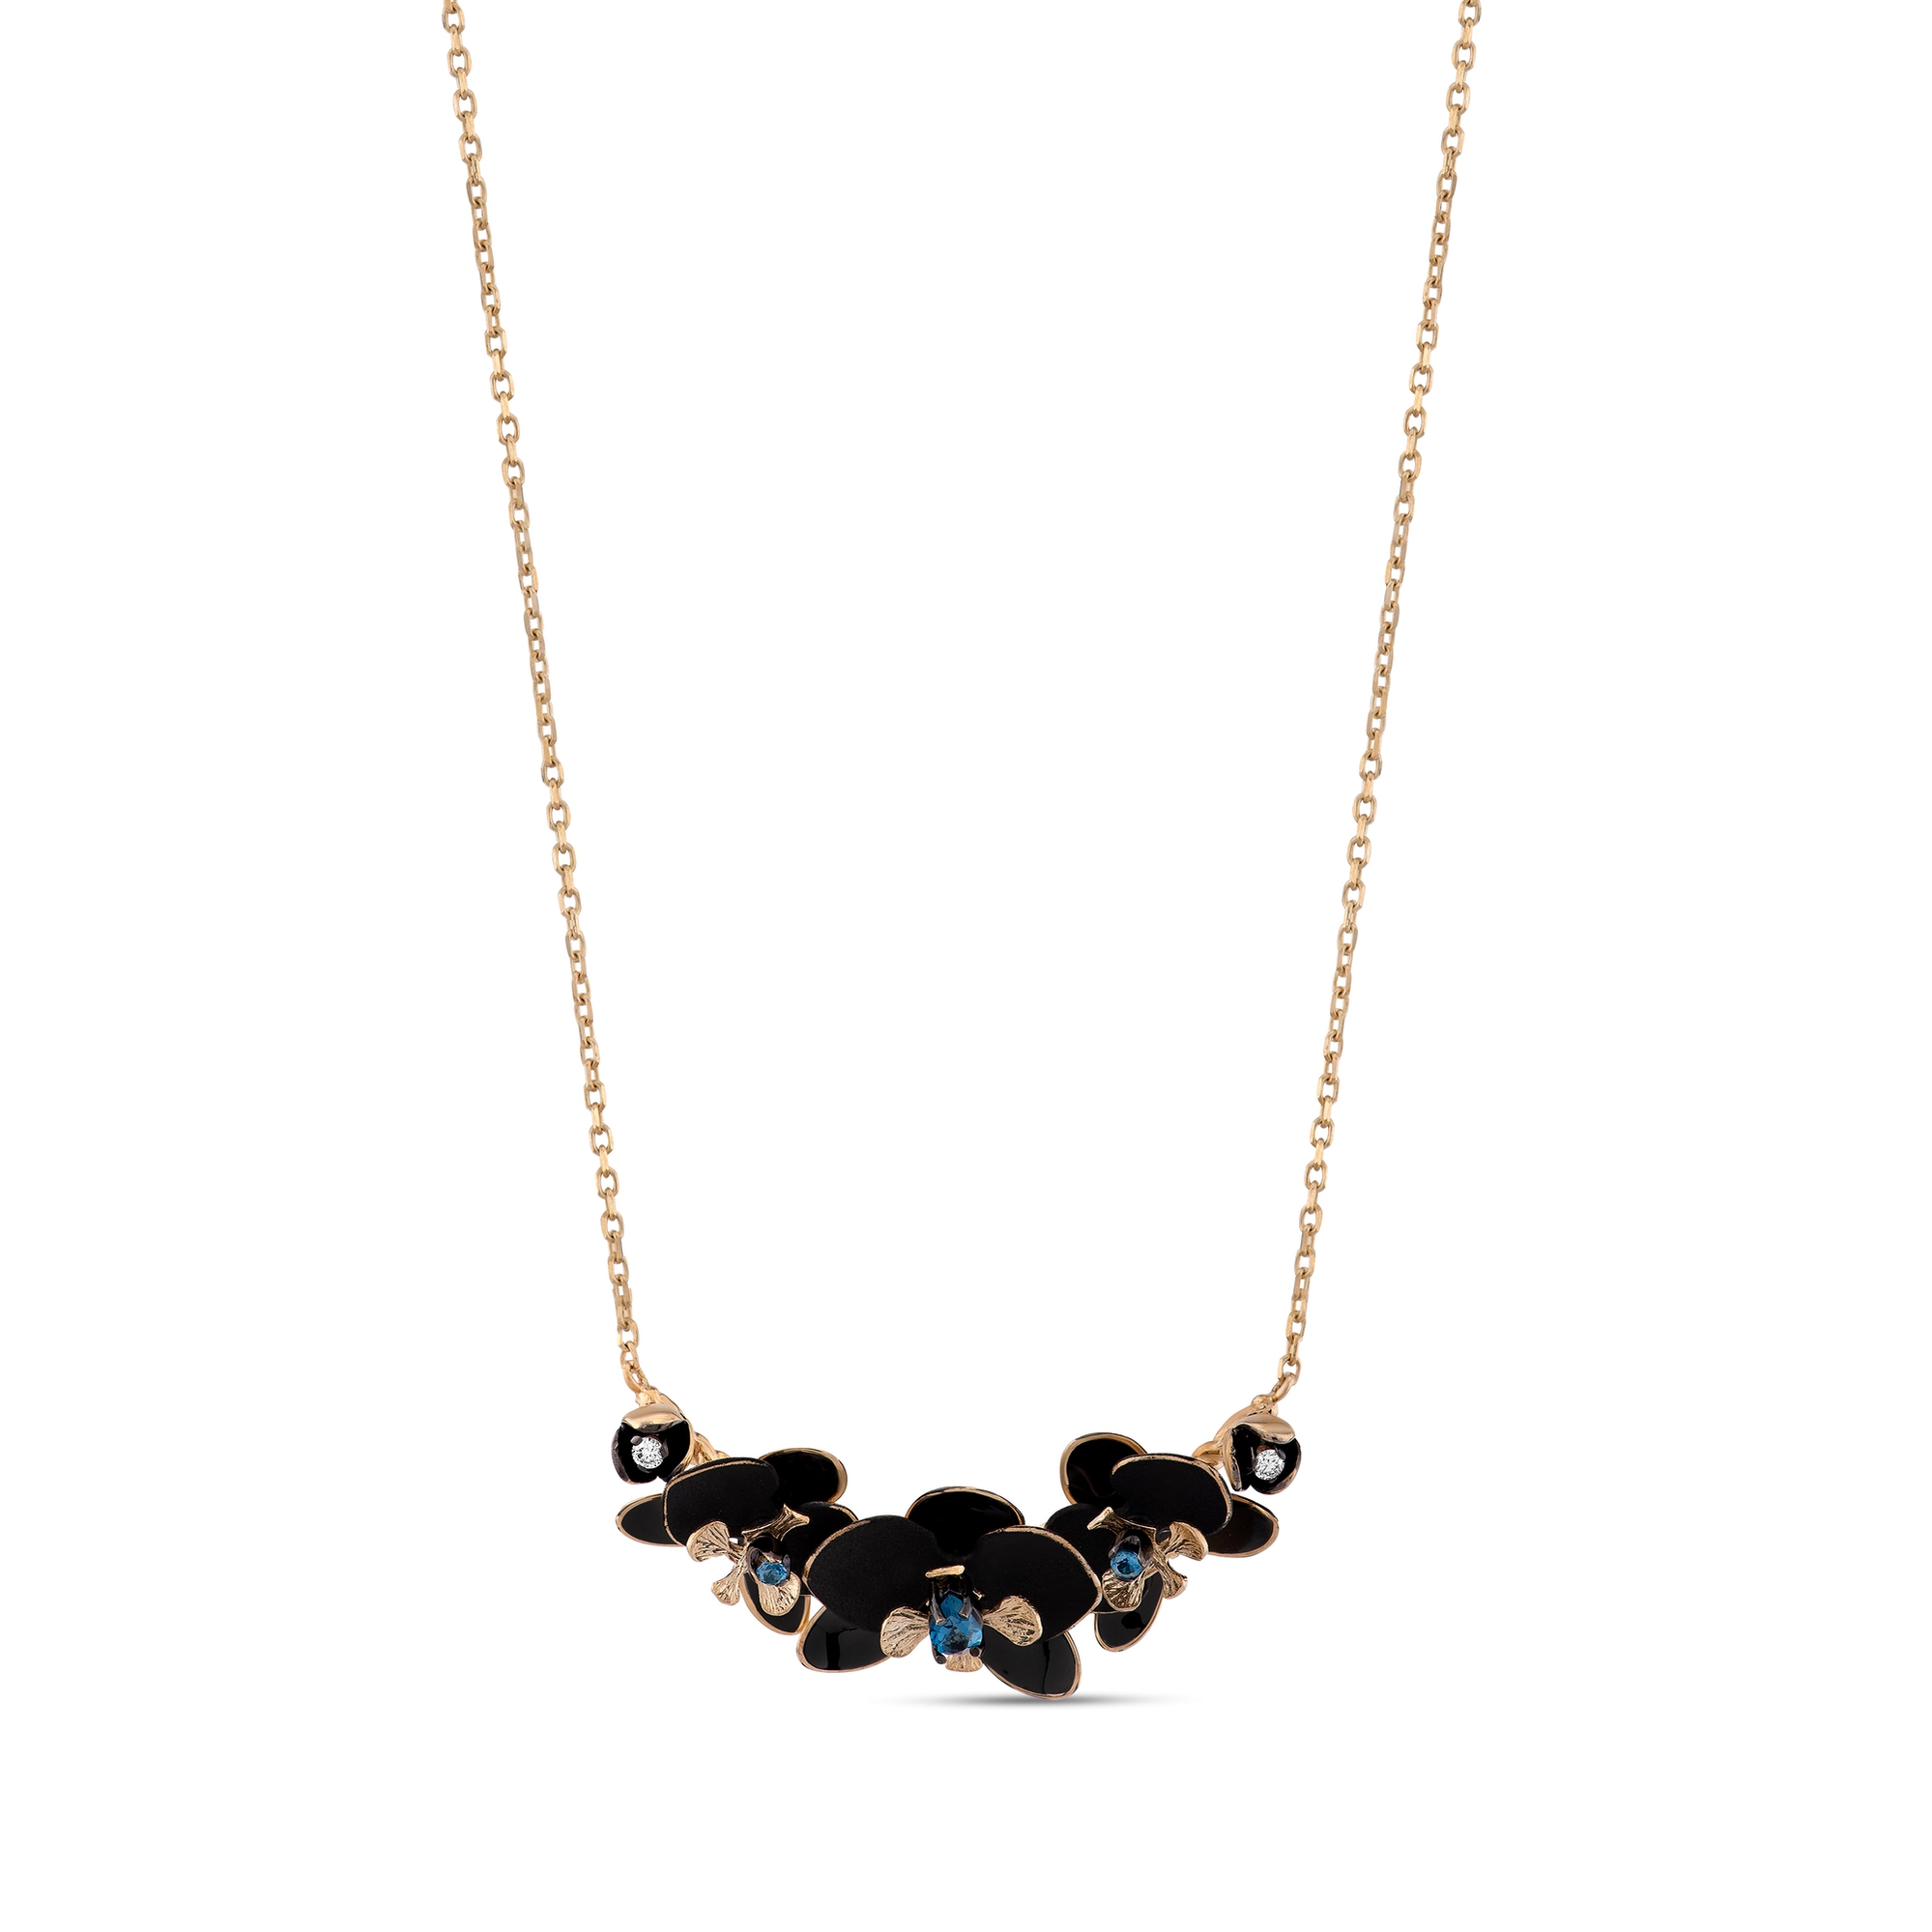 BLACK ORCHID NECKLACE